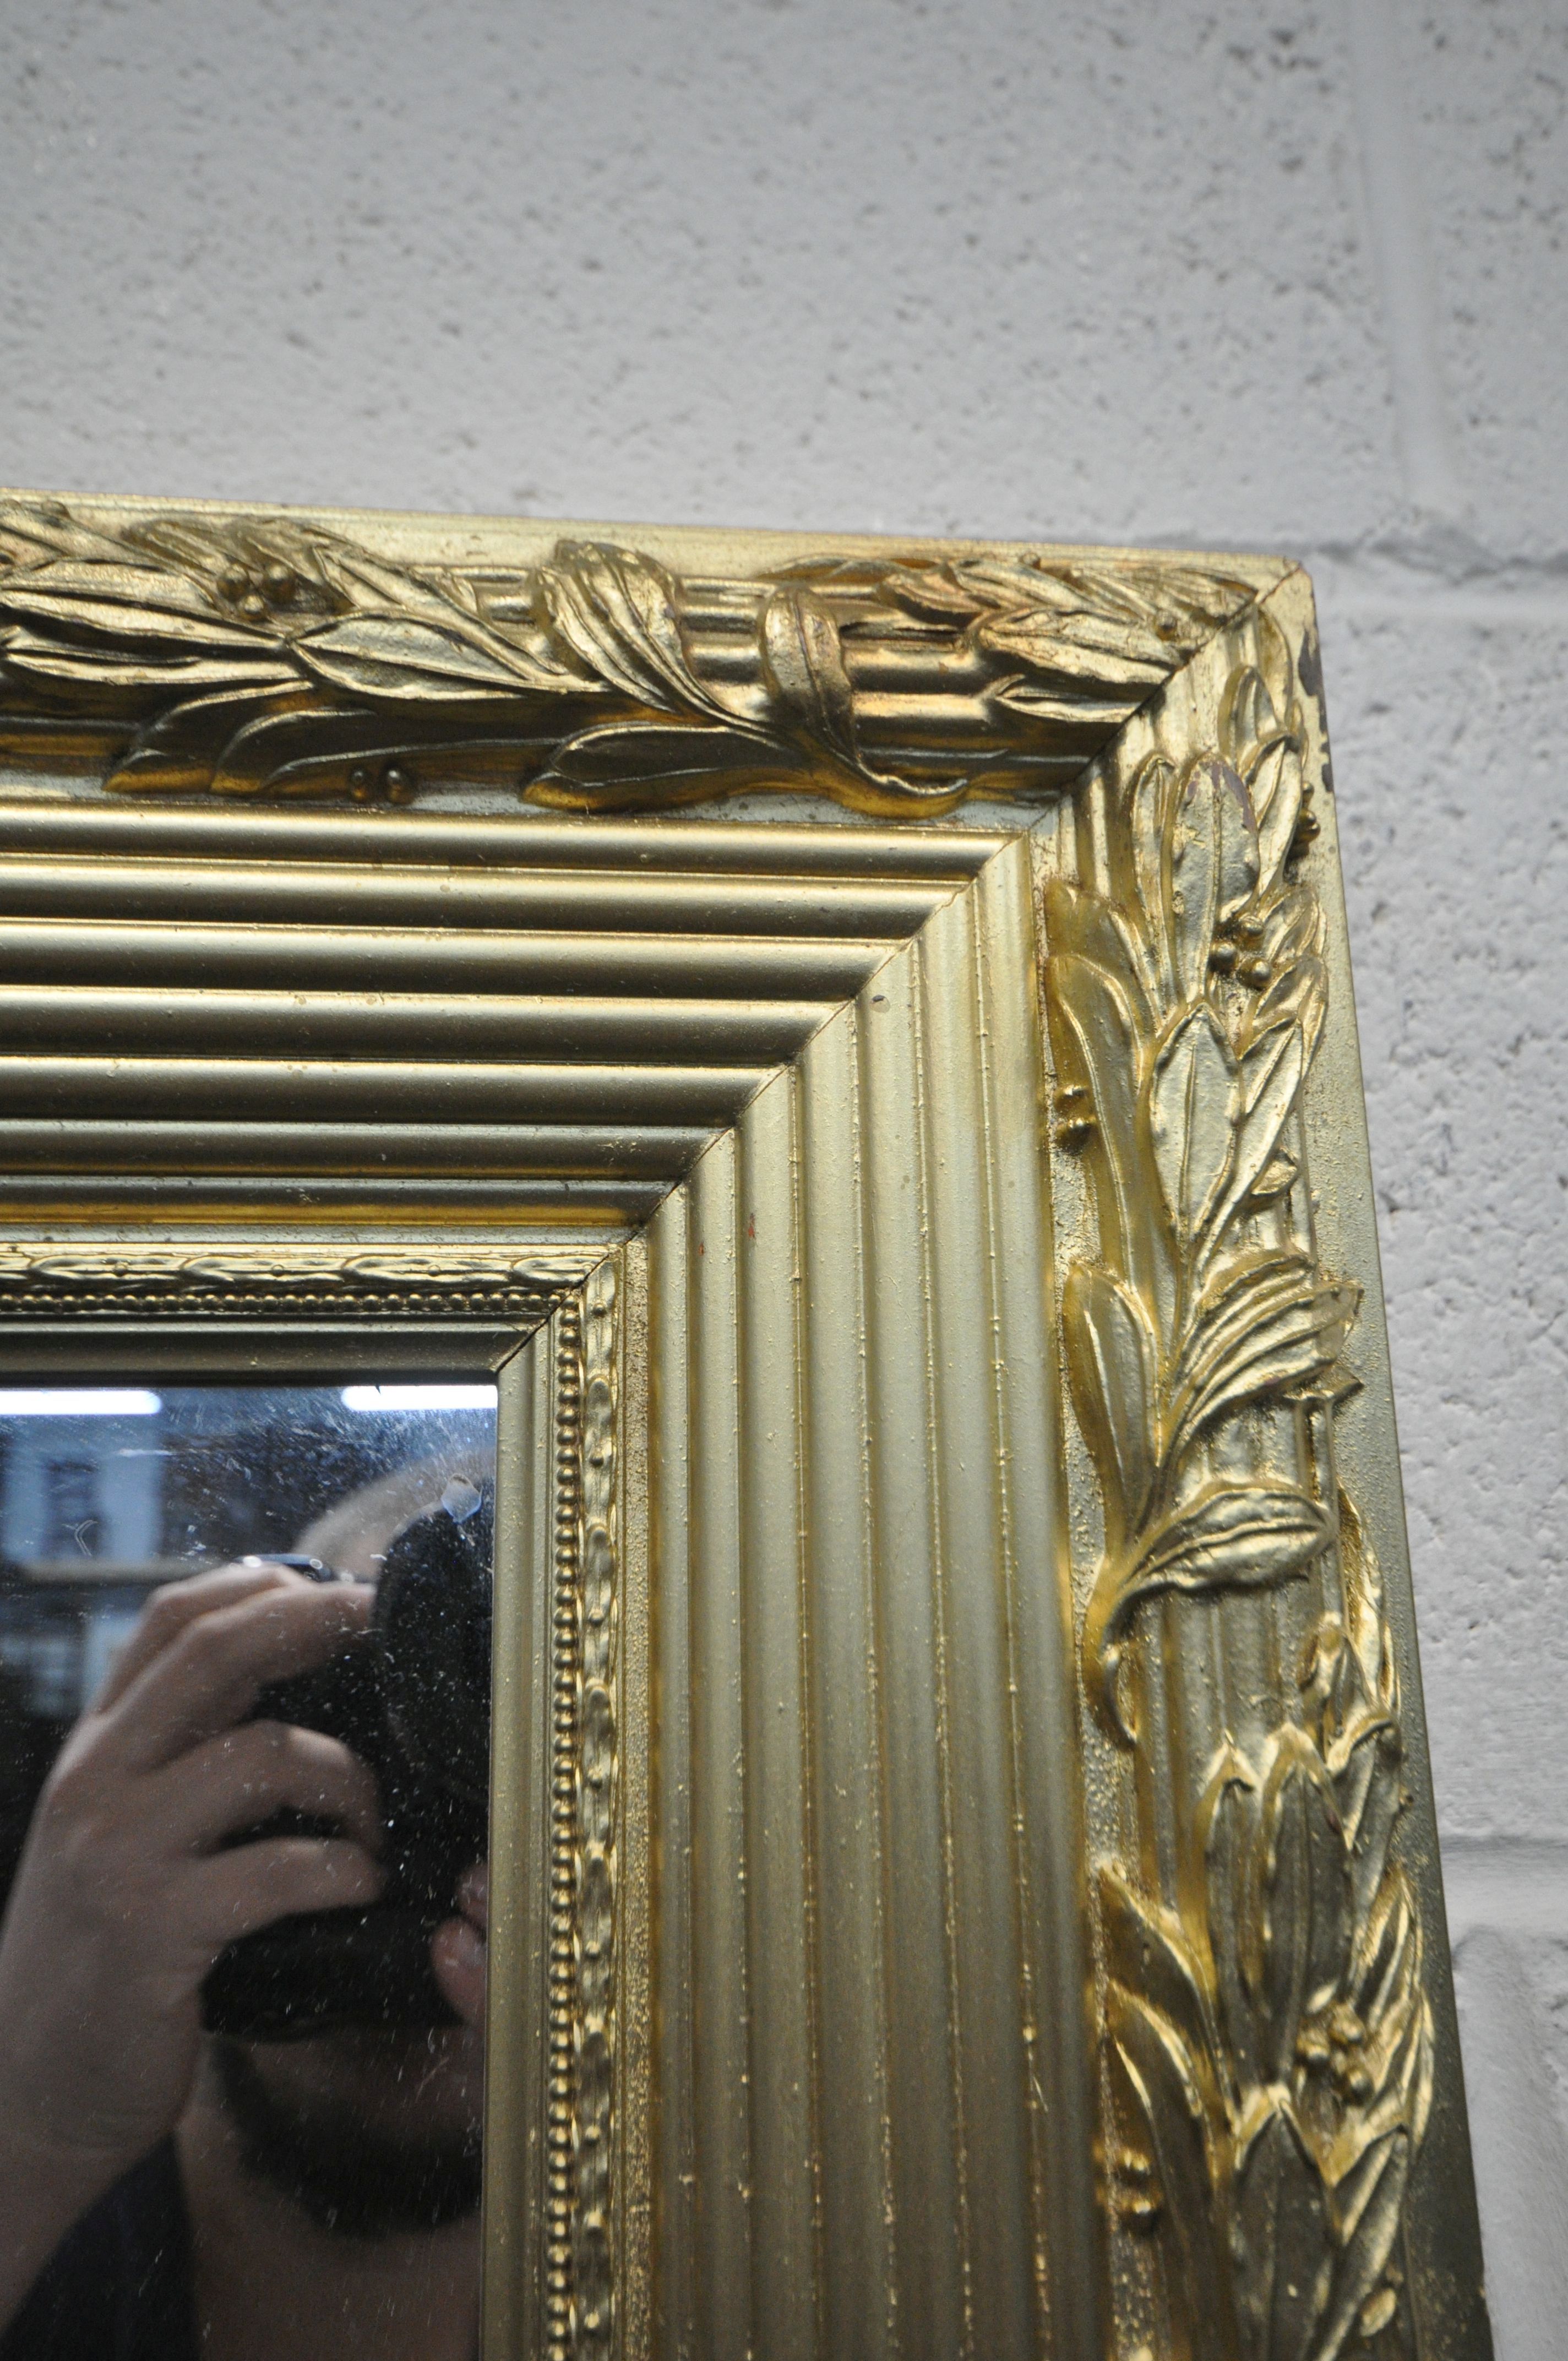 A LARGE RECTANGULAR GILT FRAME WALL MIRROR, with foliate detail, 104cm x 84cm (good condition) - Image 3 of 3